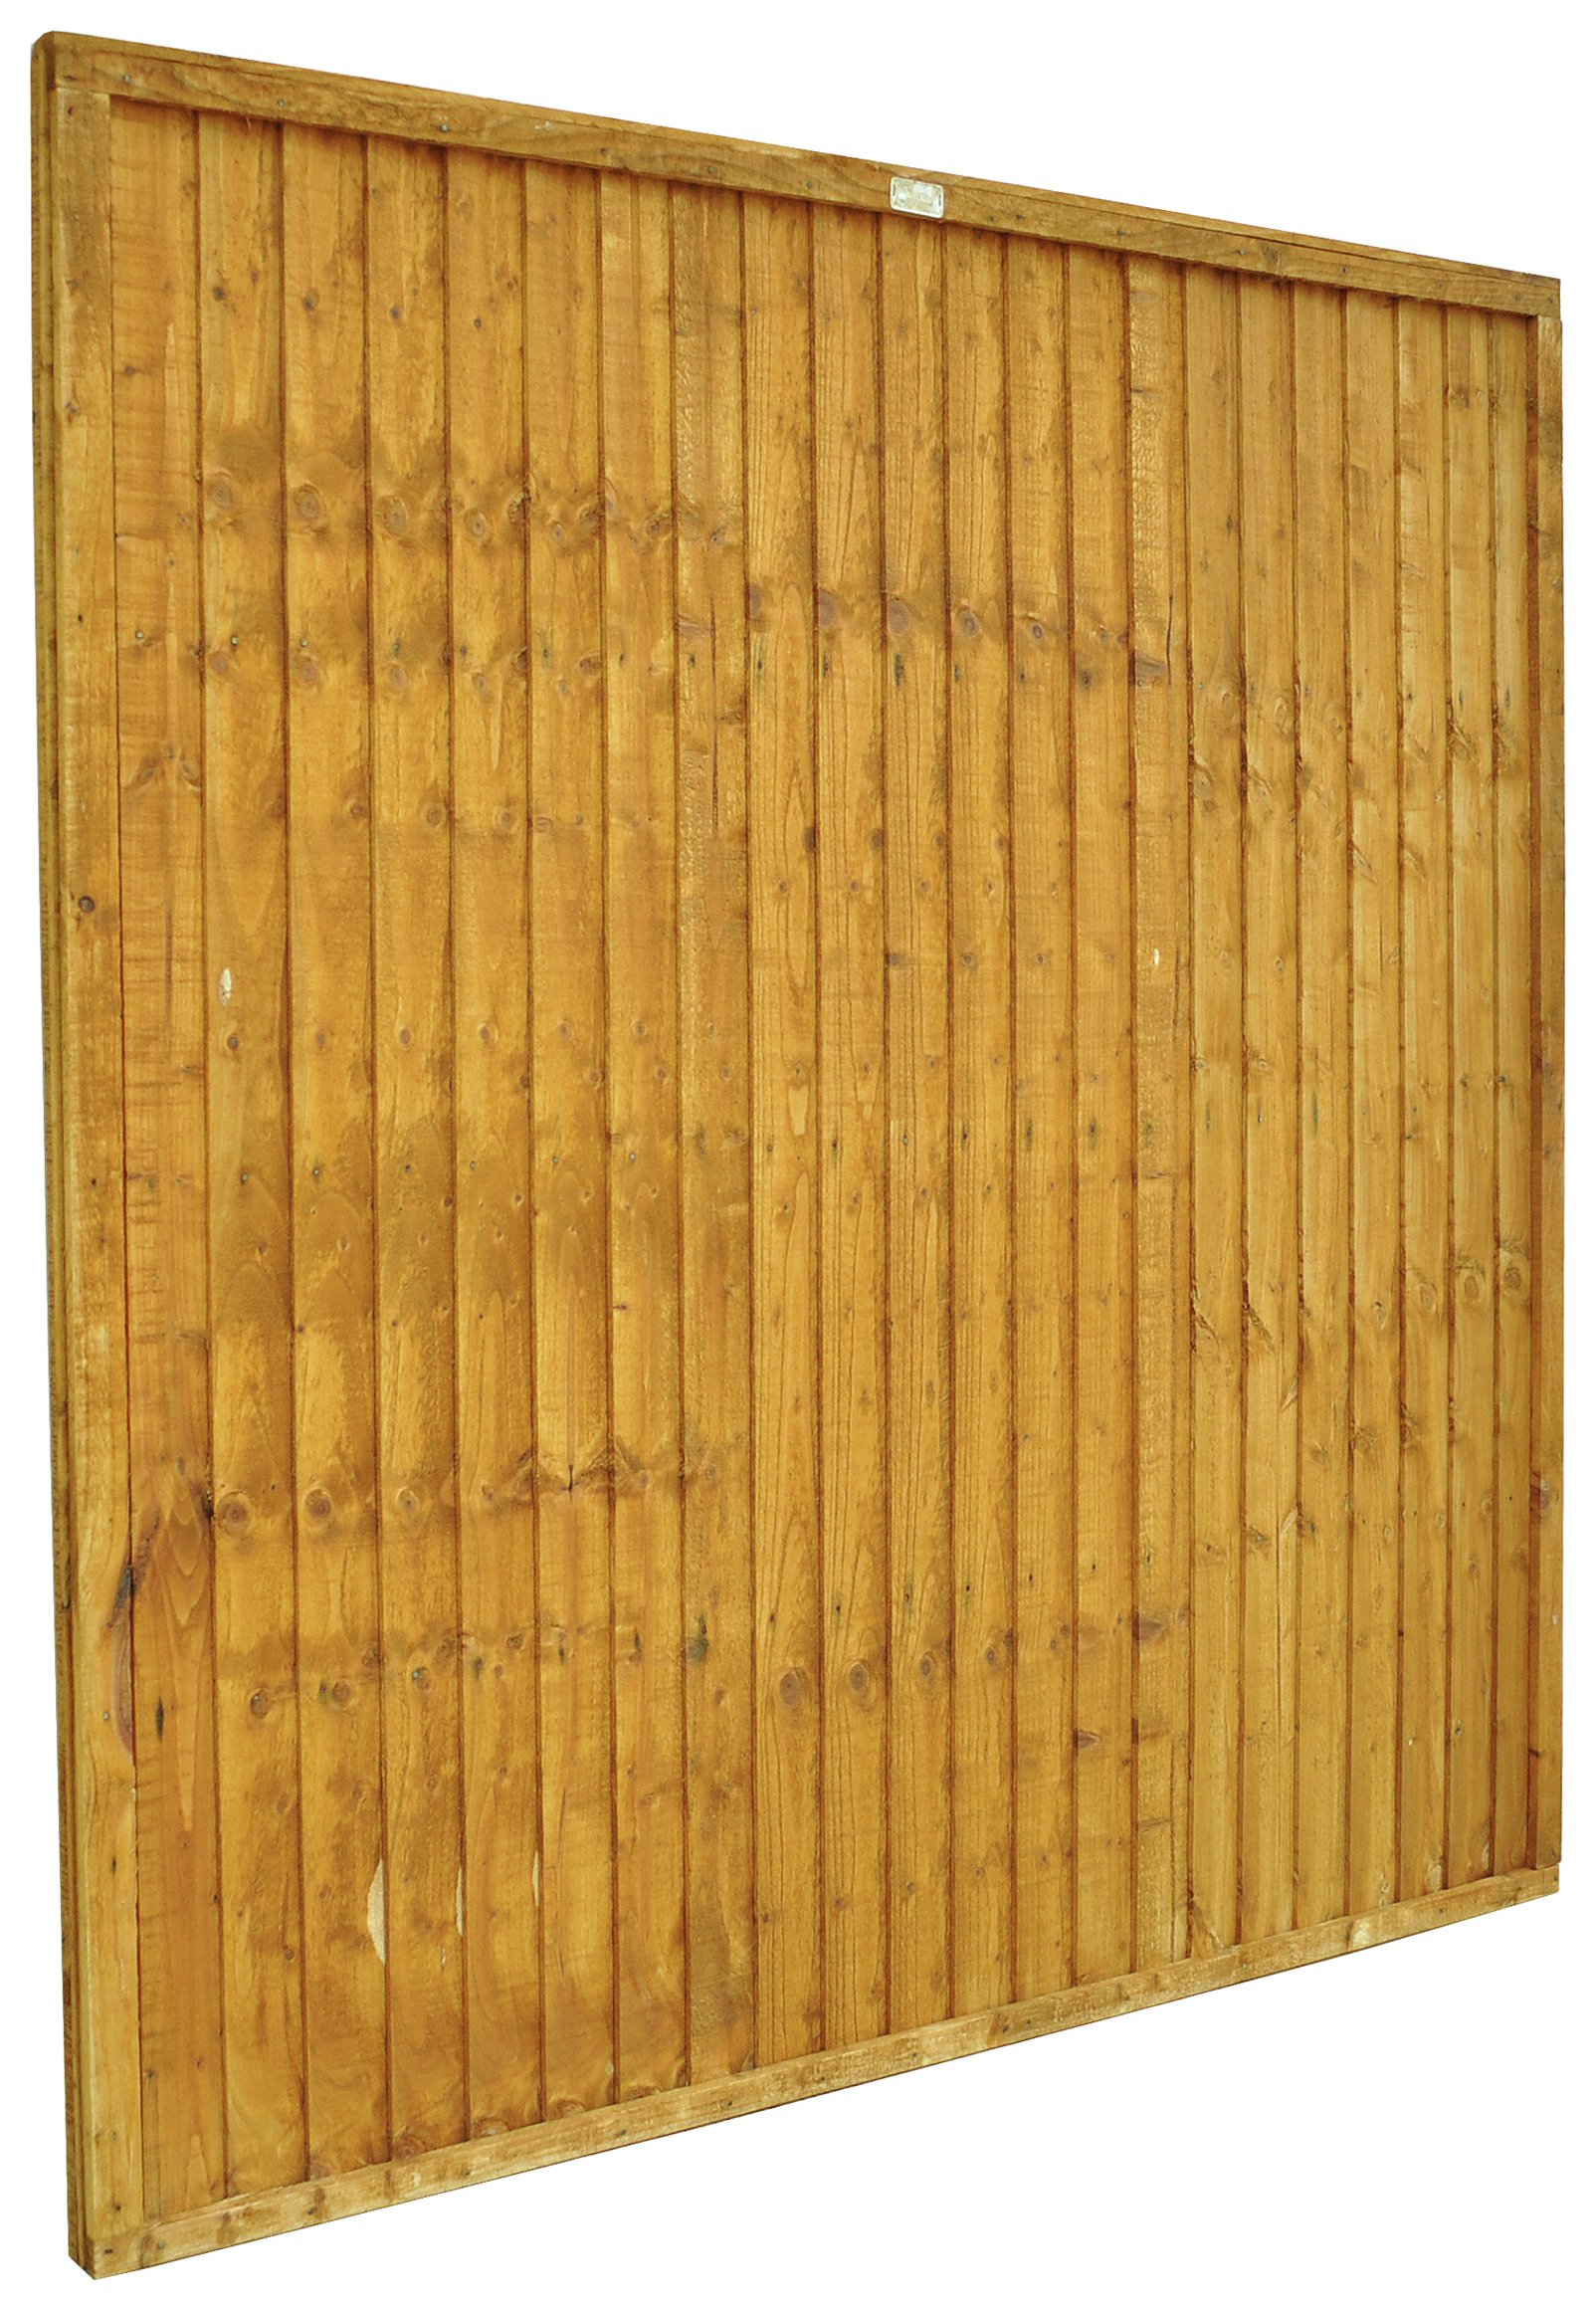 Forest 6ft (1.83m) Closeboard Fence Panel - Pack of 4